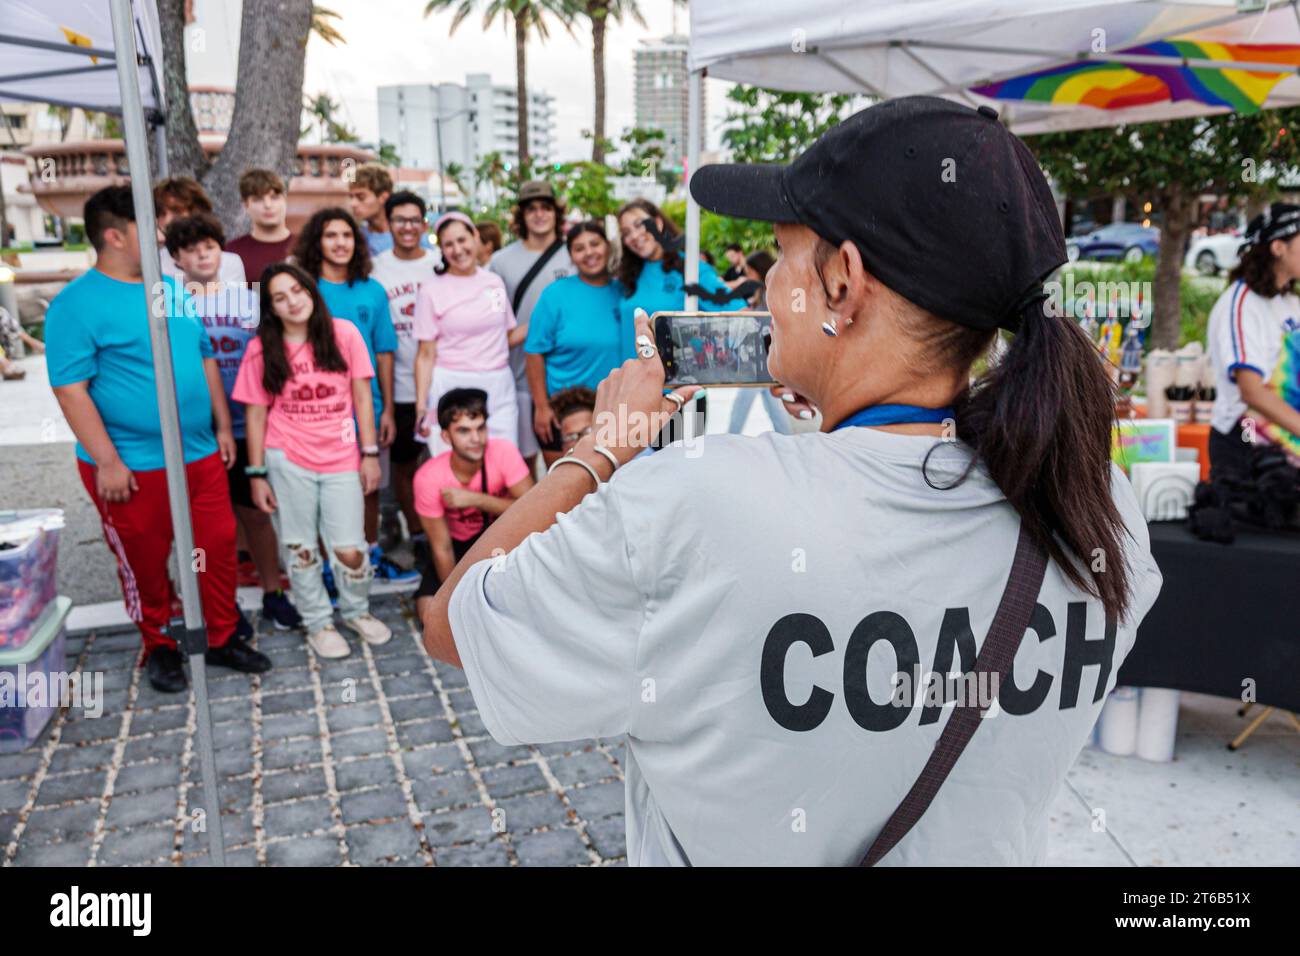 Miami Beach Florida,Normandy Isle Fountain plaza,annual Halloween community event activities,youth boxing club coach,taking making photo group posing, Stock Photo